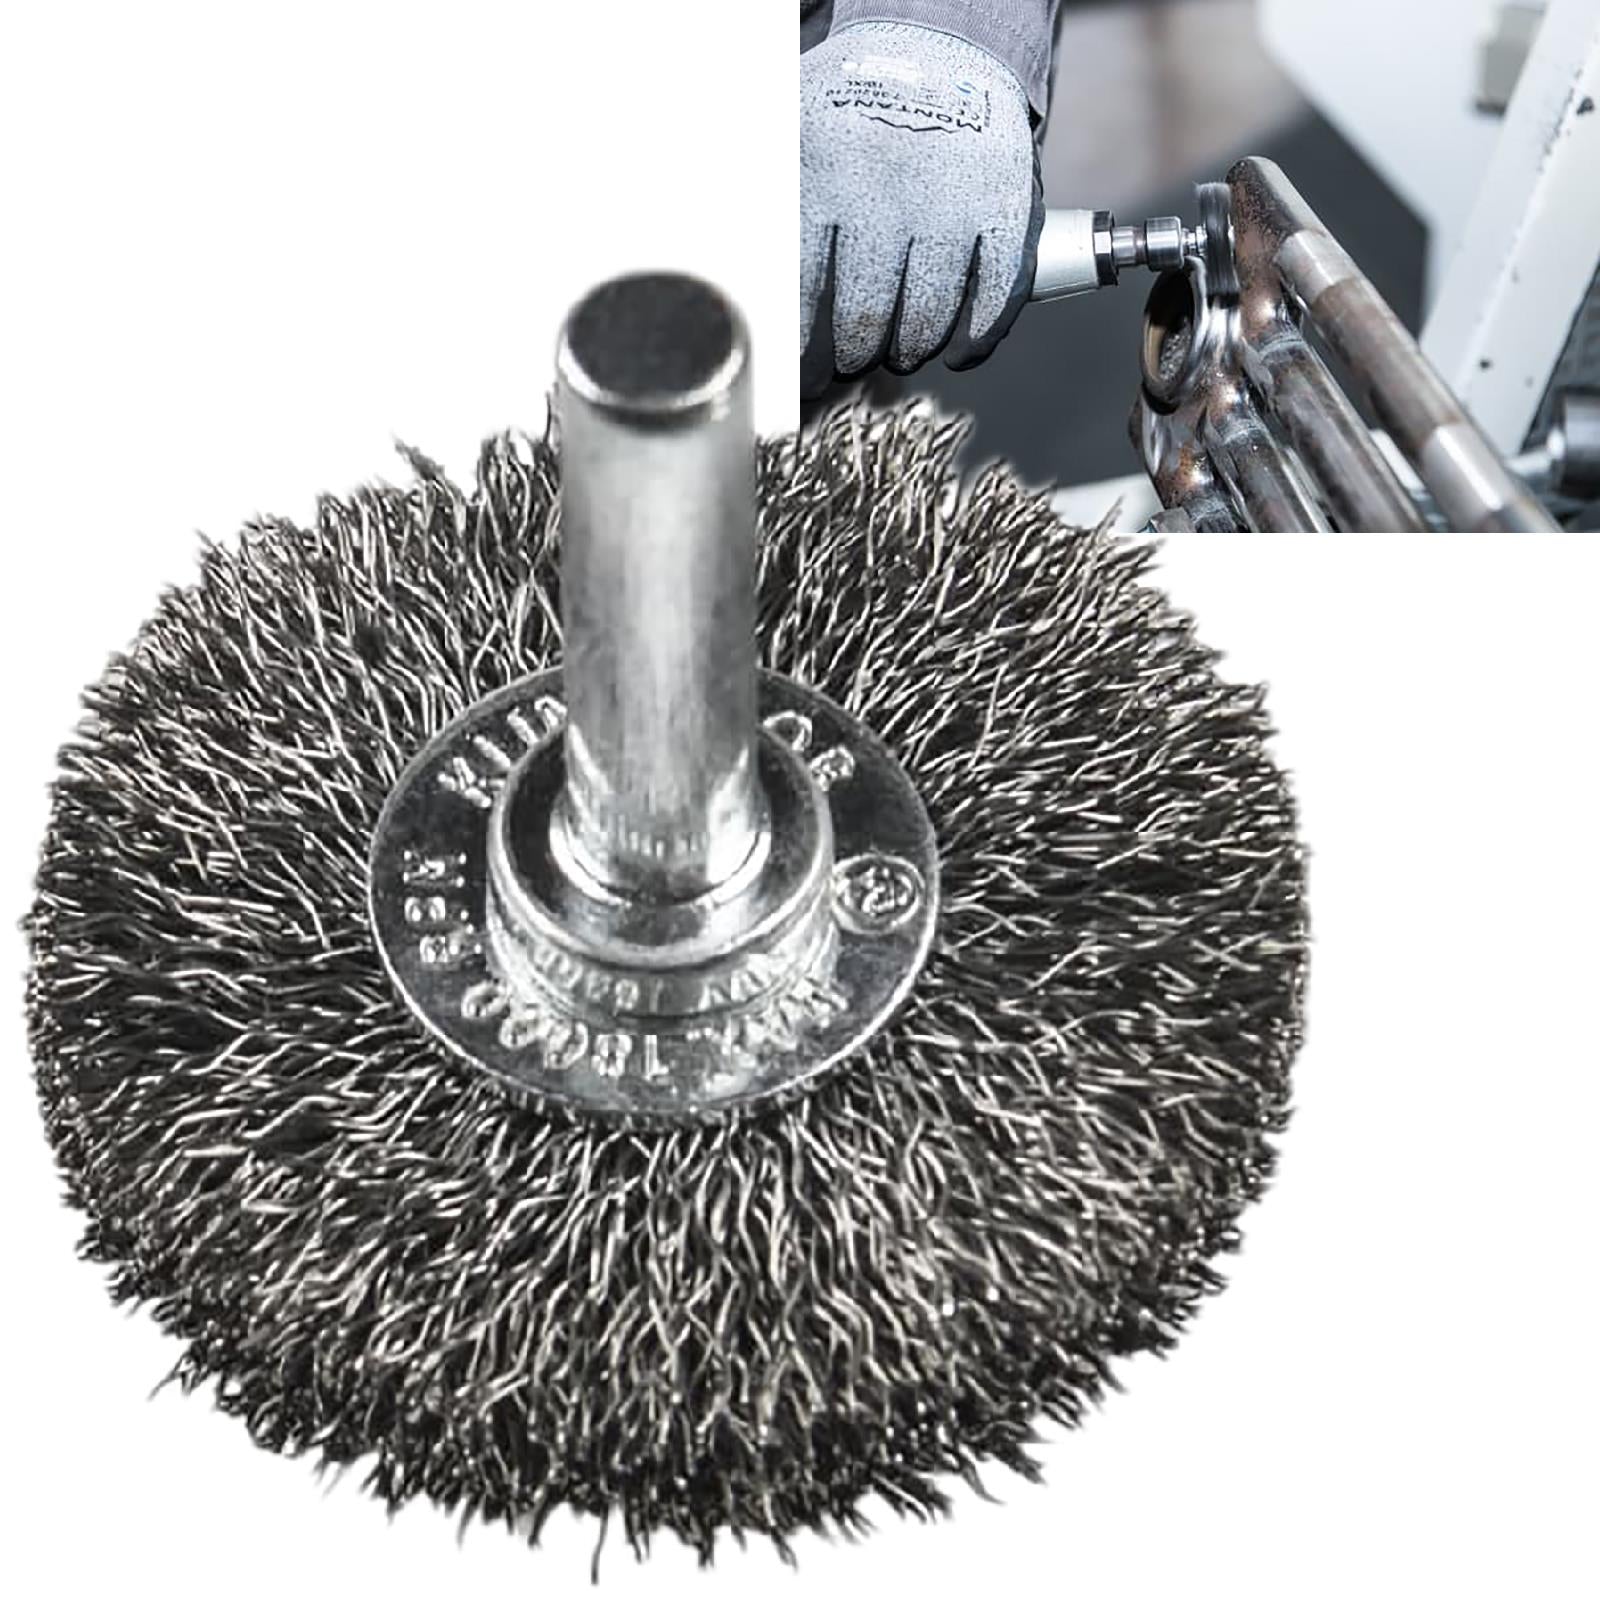 3 Crimped Wire Wheel Brush with 1/4 Shank